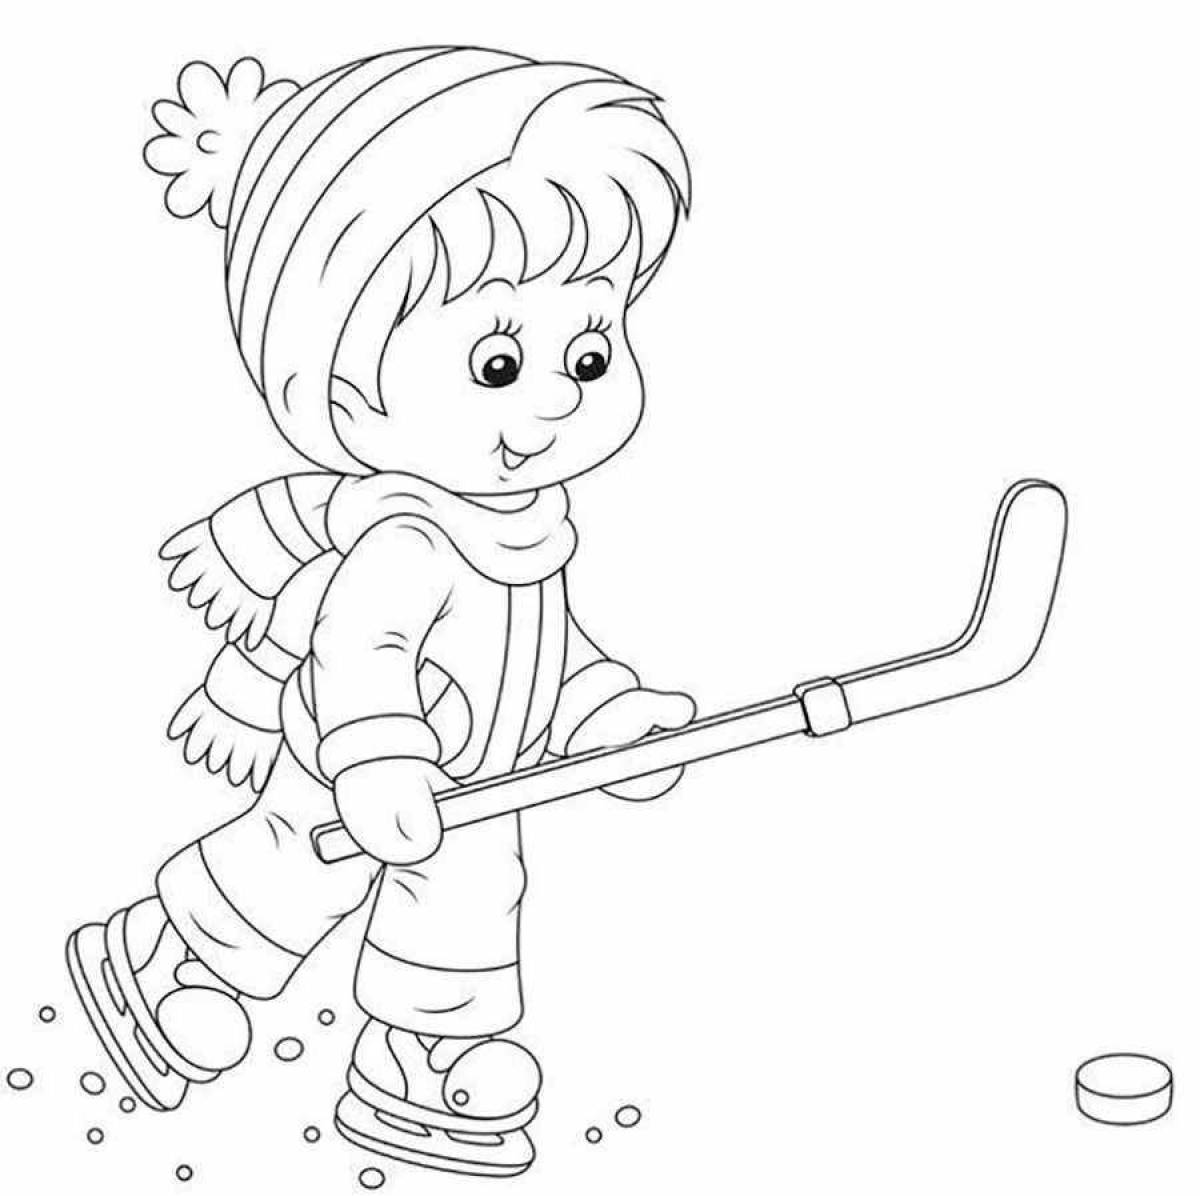 Fabulous winter sports coloring pages for kids